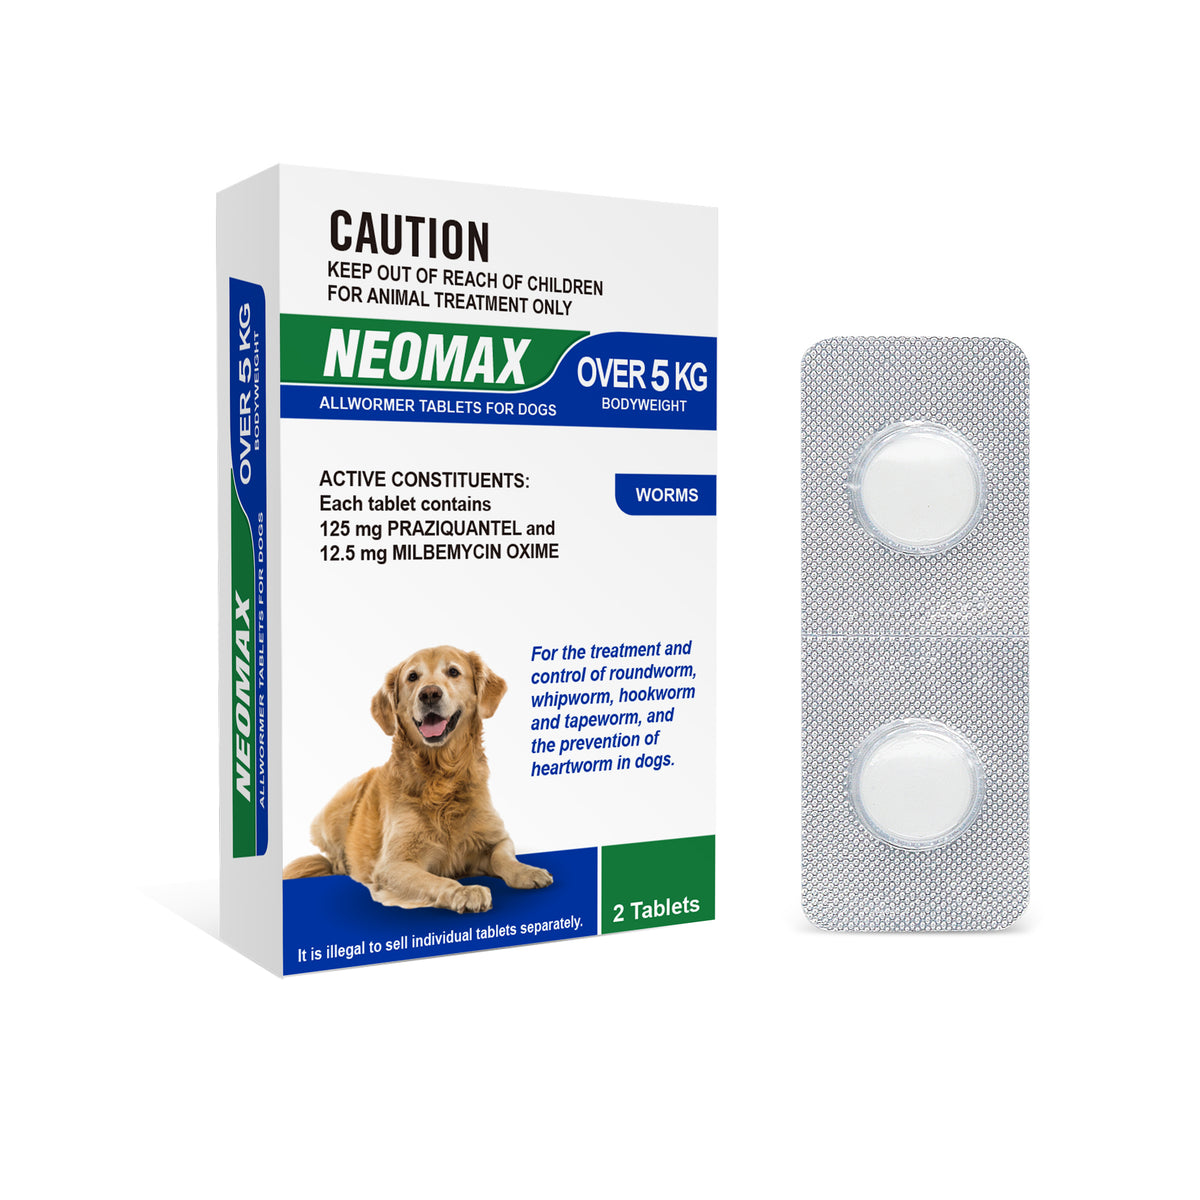 Neomax Allwormer Tablets for Dogs over 5kg